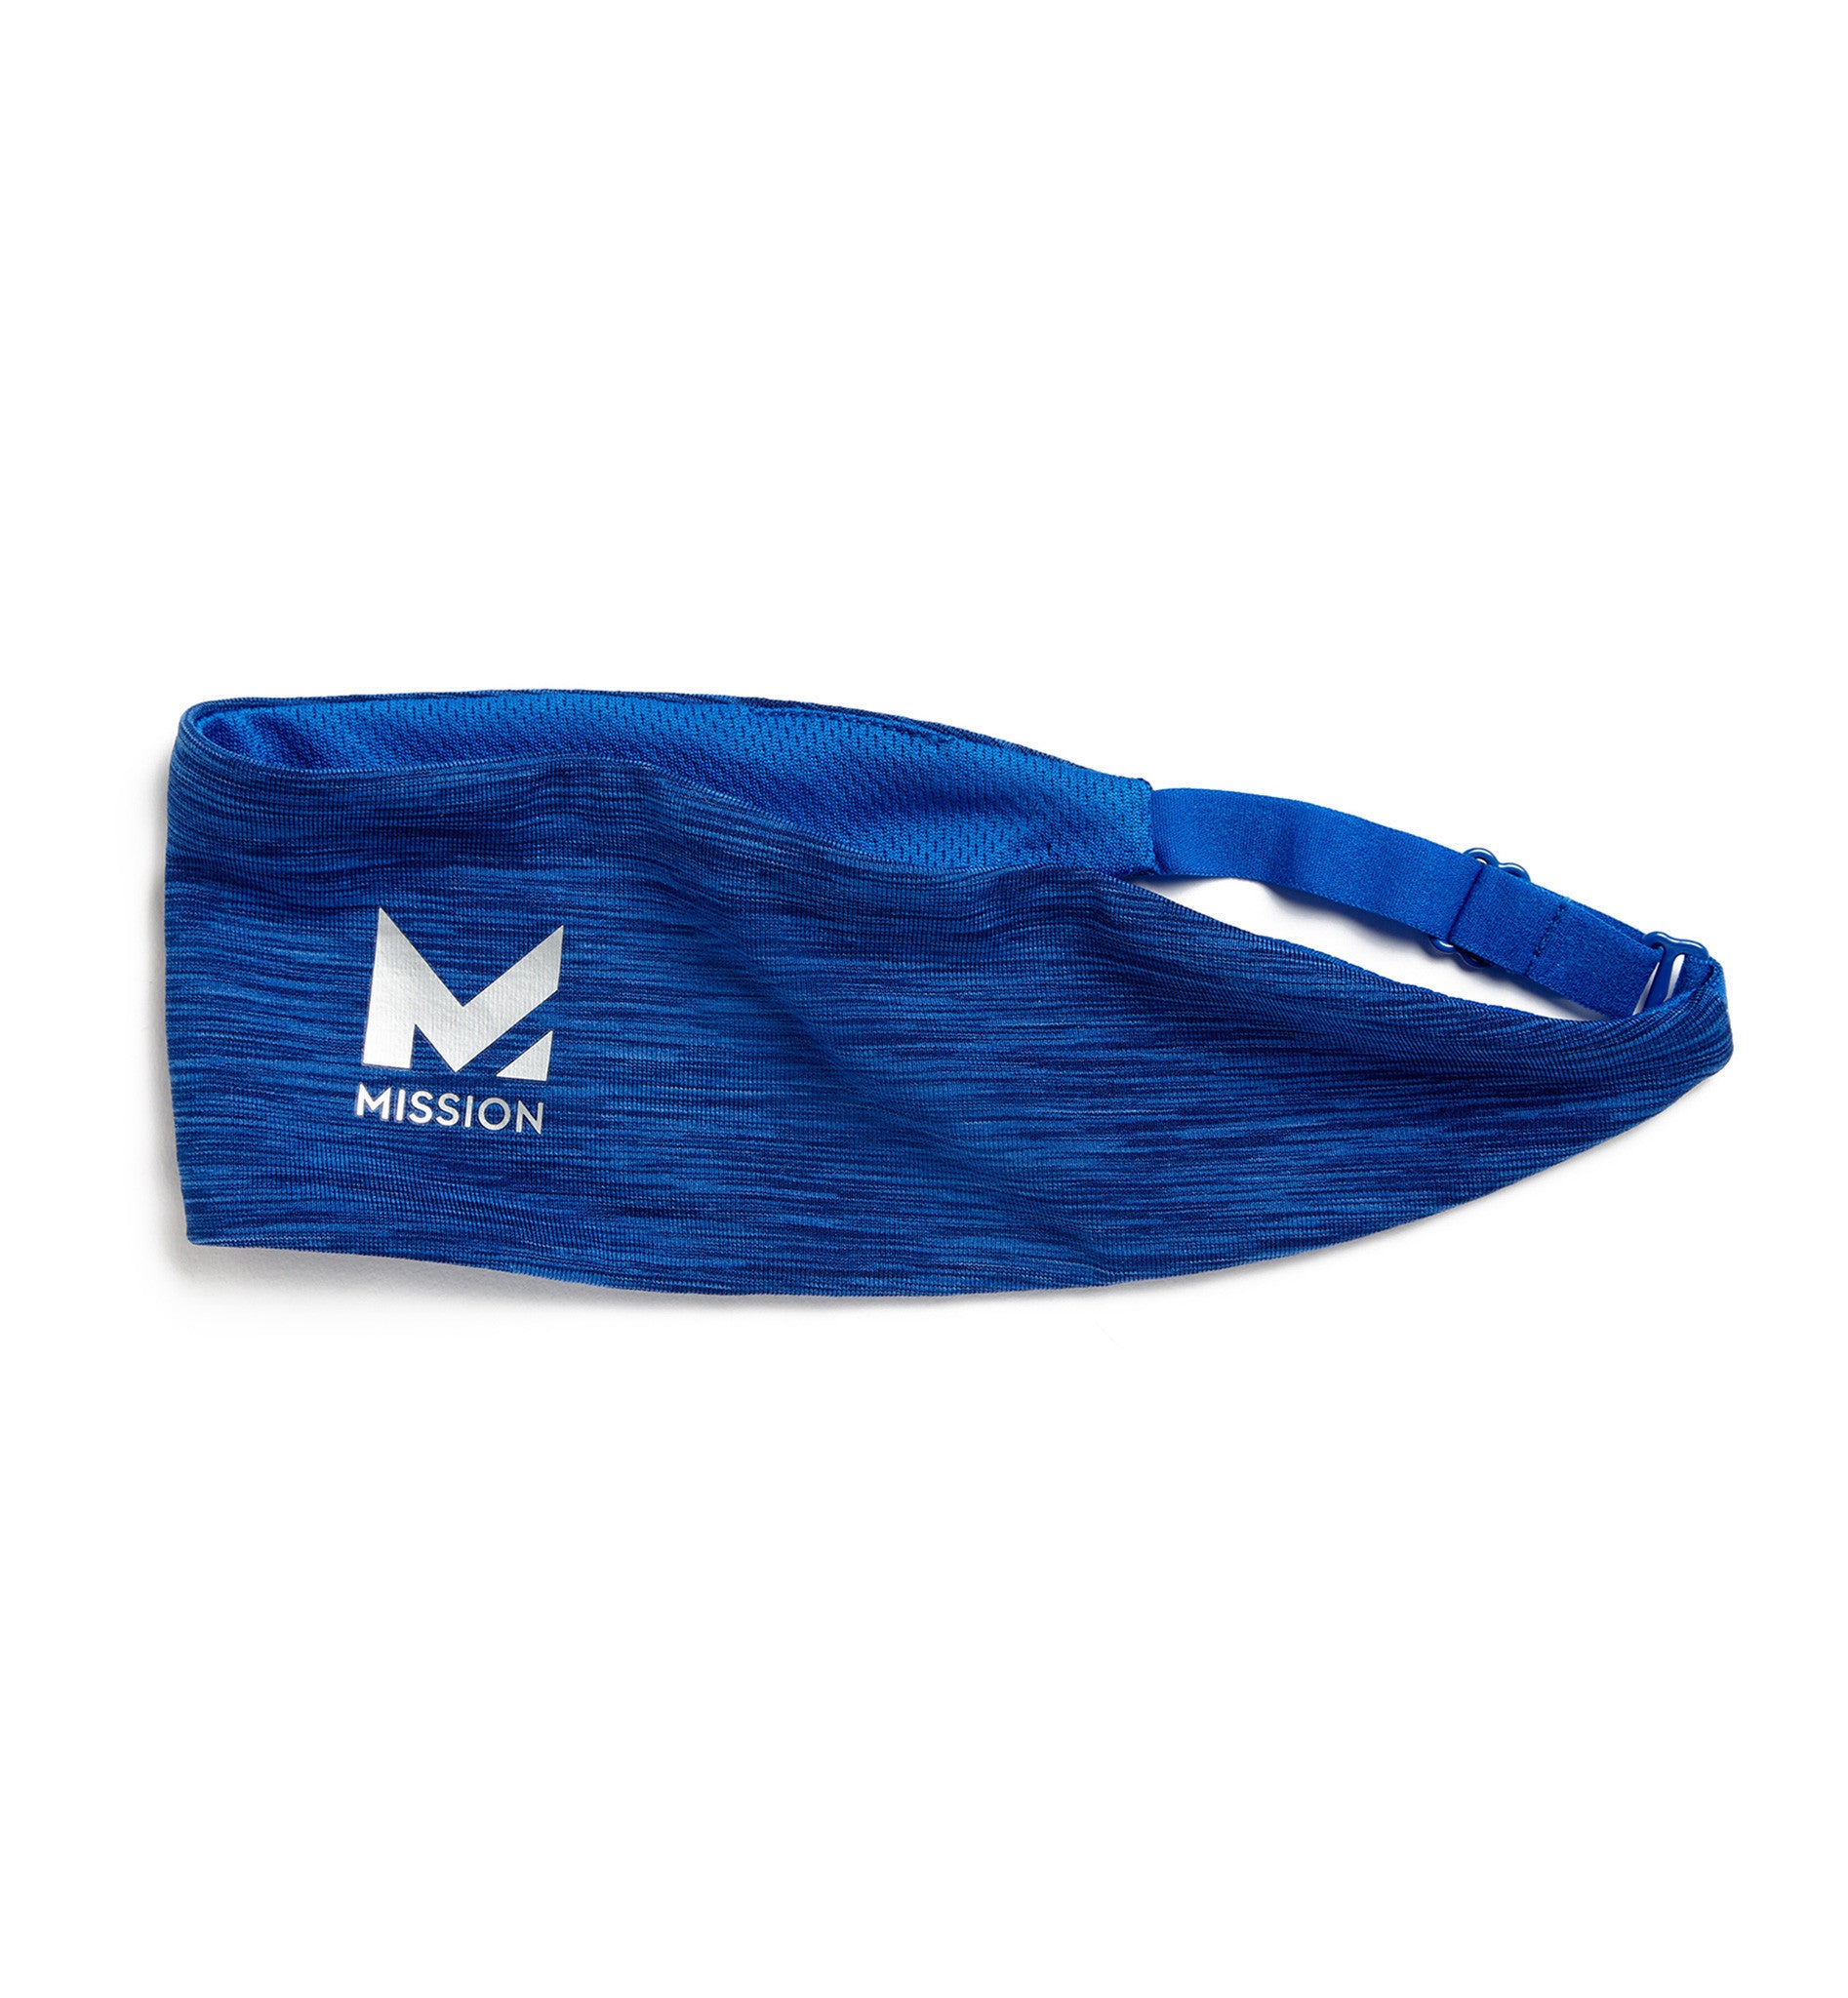 Cooling Lockdown Headband Headbands MISSION One Size Royal Blue Space Dye 